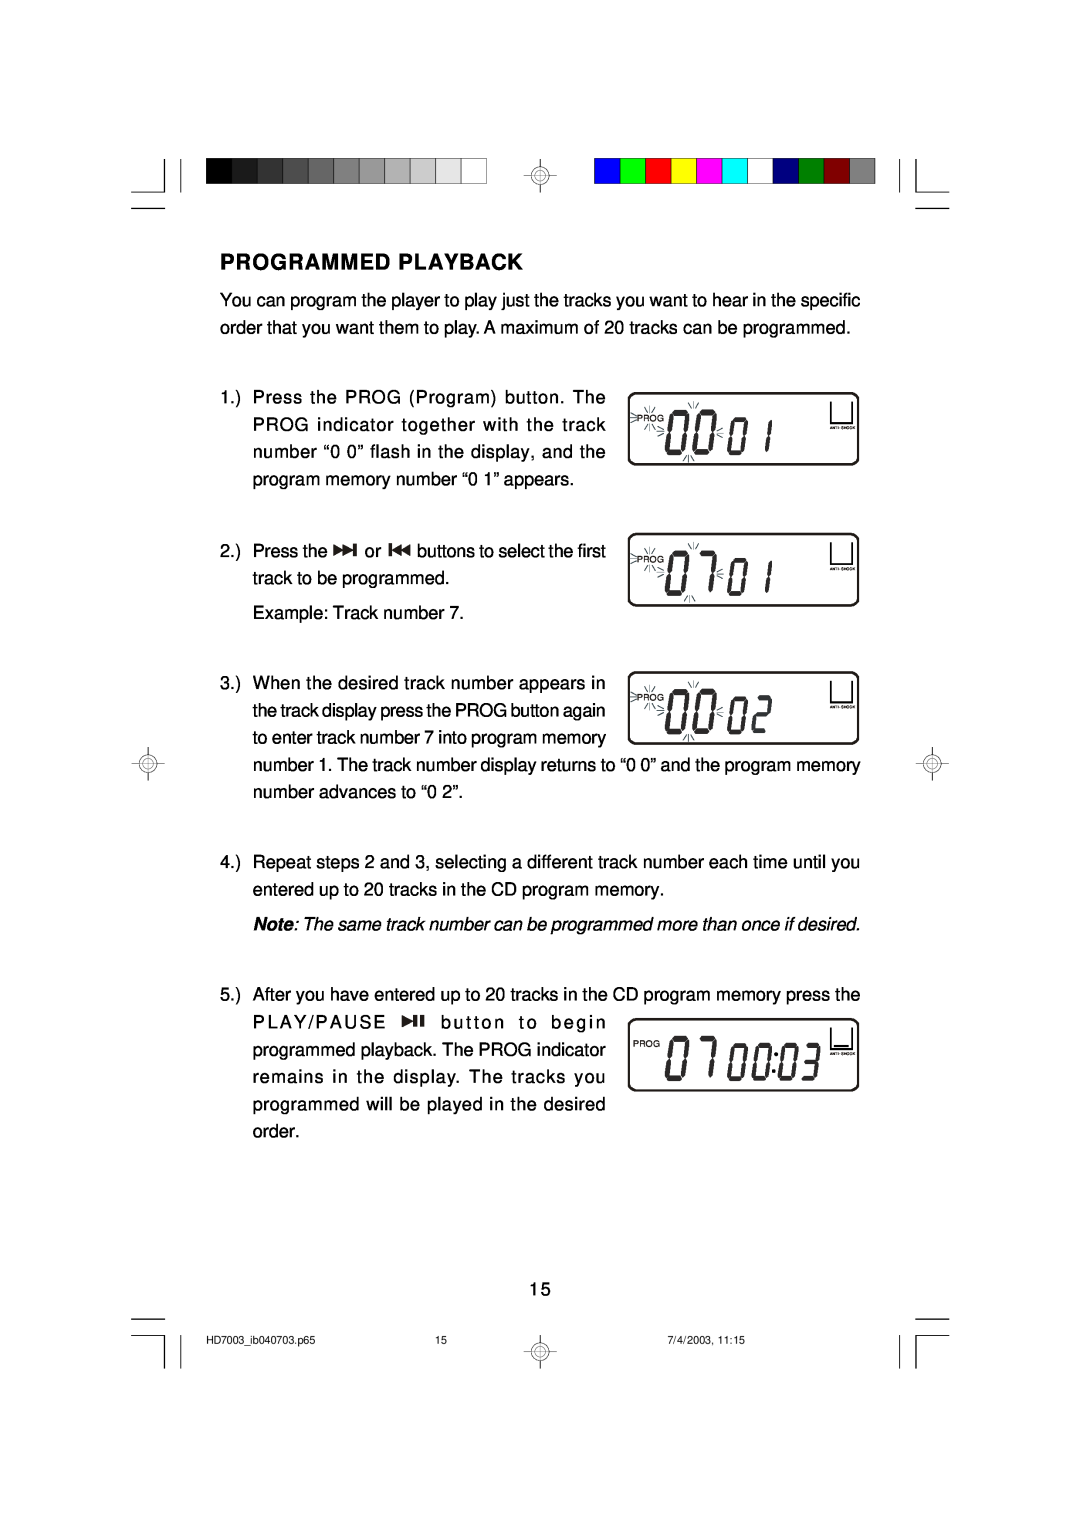 Emerson HD7003 owner manual Programmed Playback 